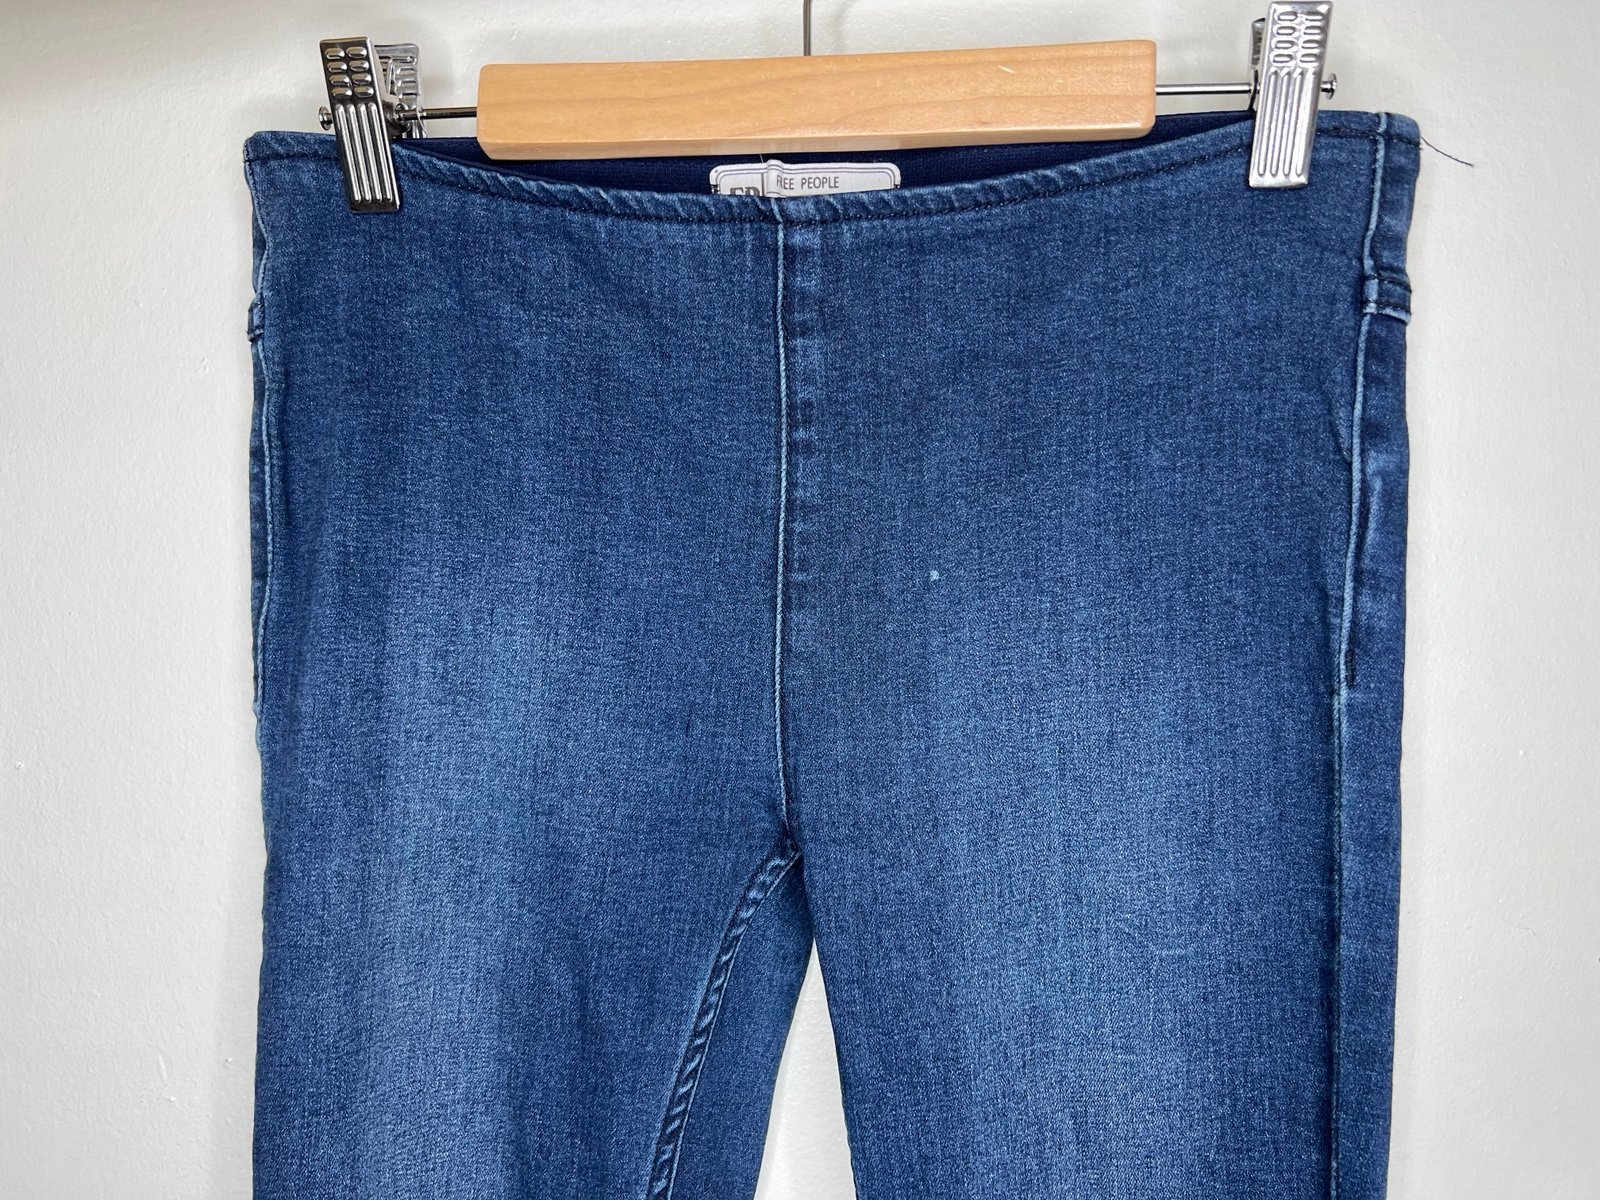 Exclusive Free People Pull-On Flare Leg Jeans NTvYrXySE just buy it